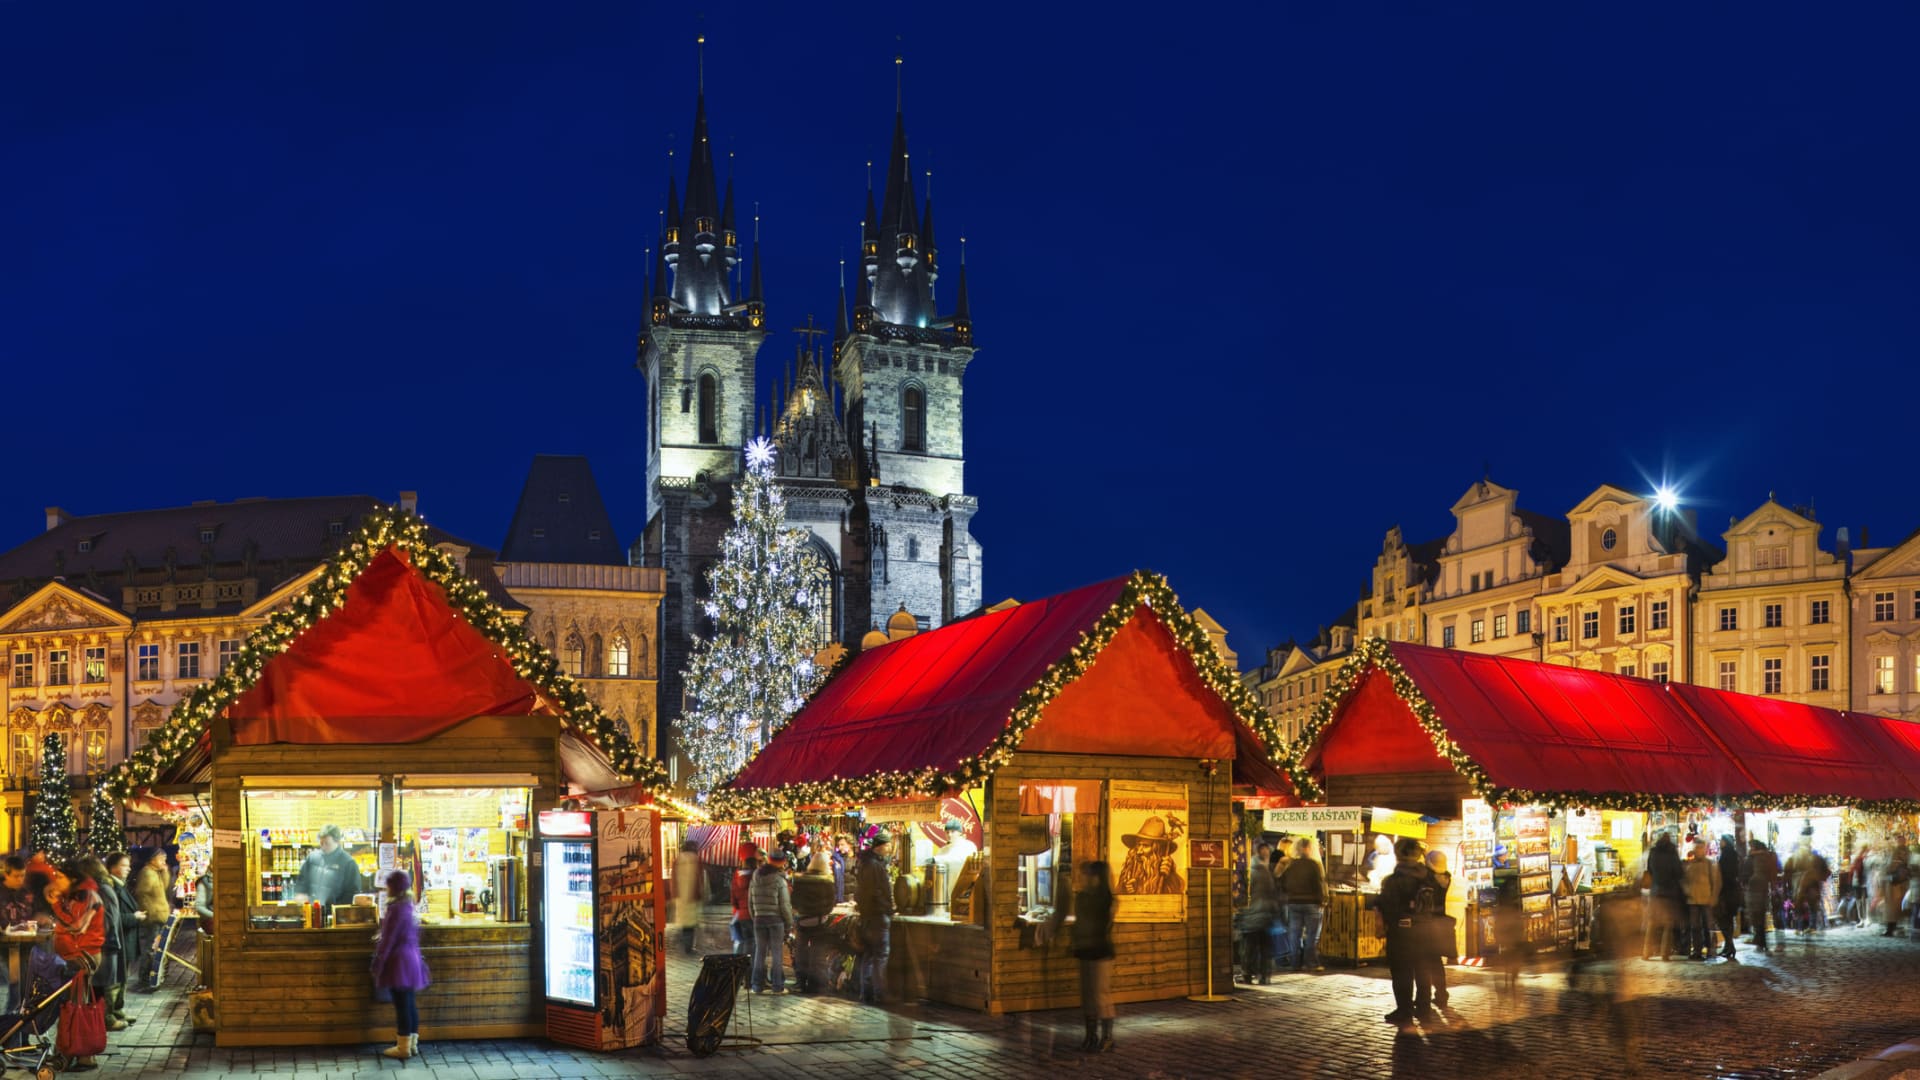 Looking for Christmas markets? A new cruise sails to 20 of France’s markets this winter